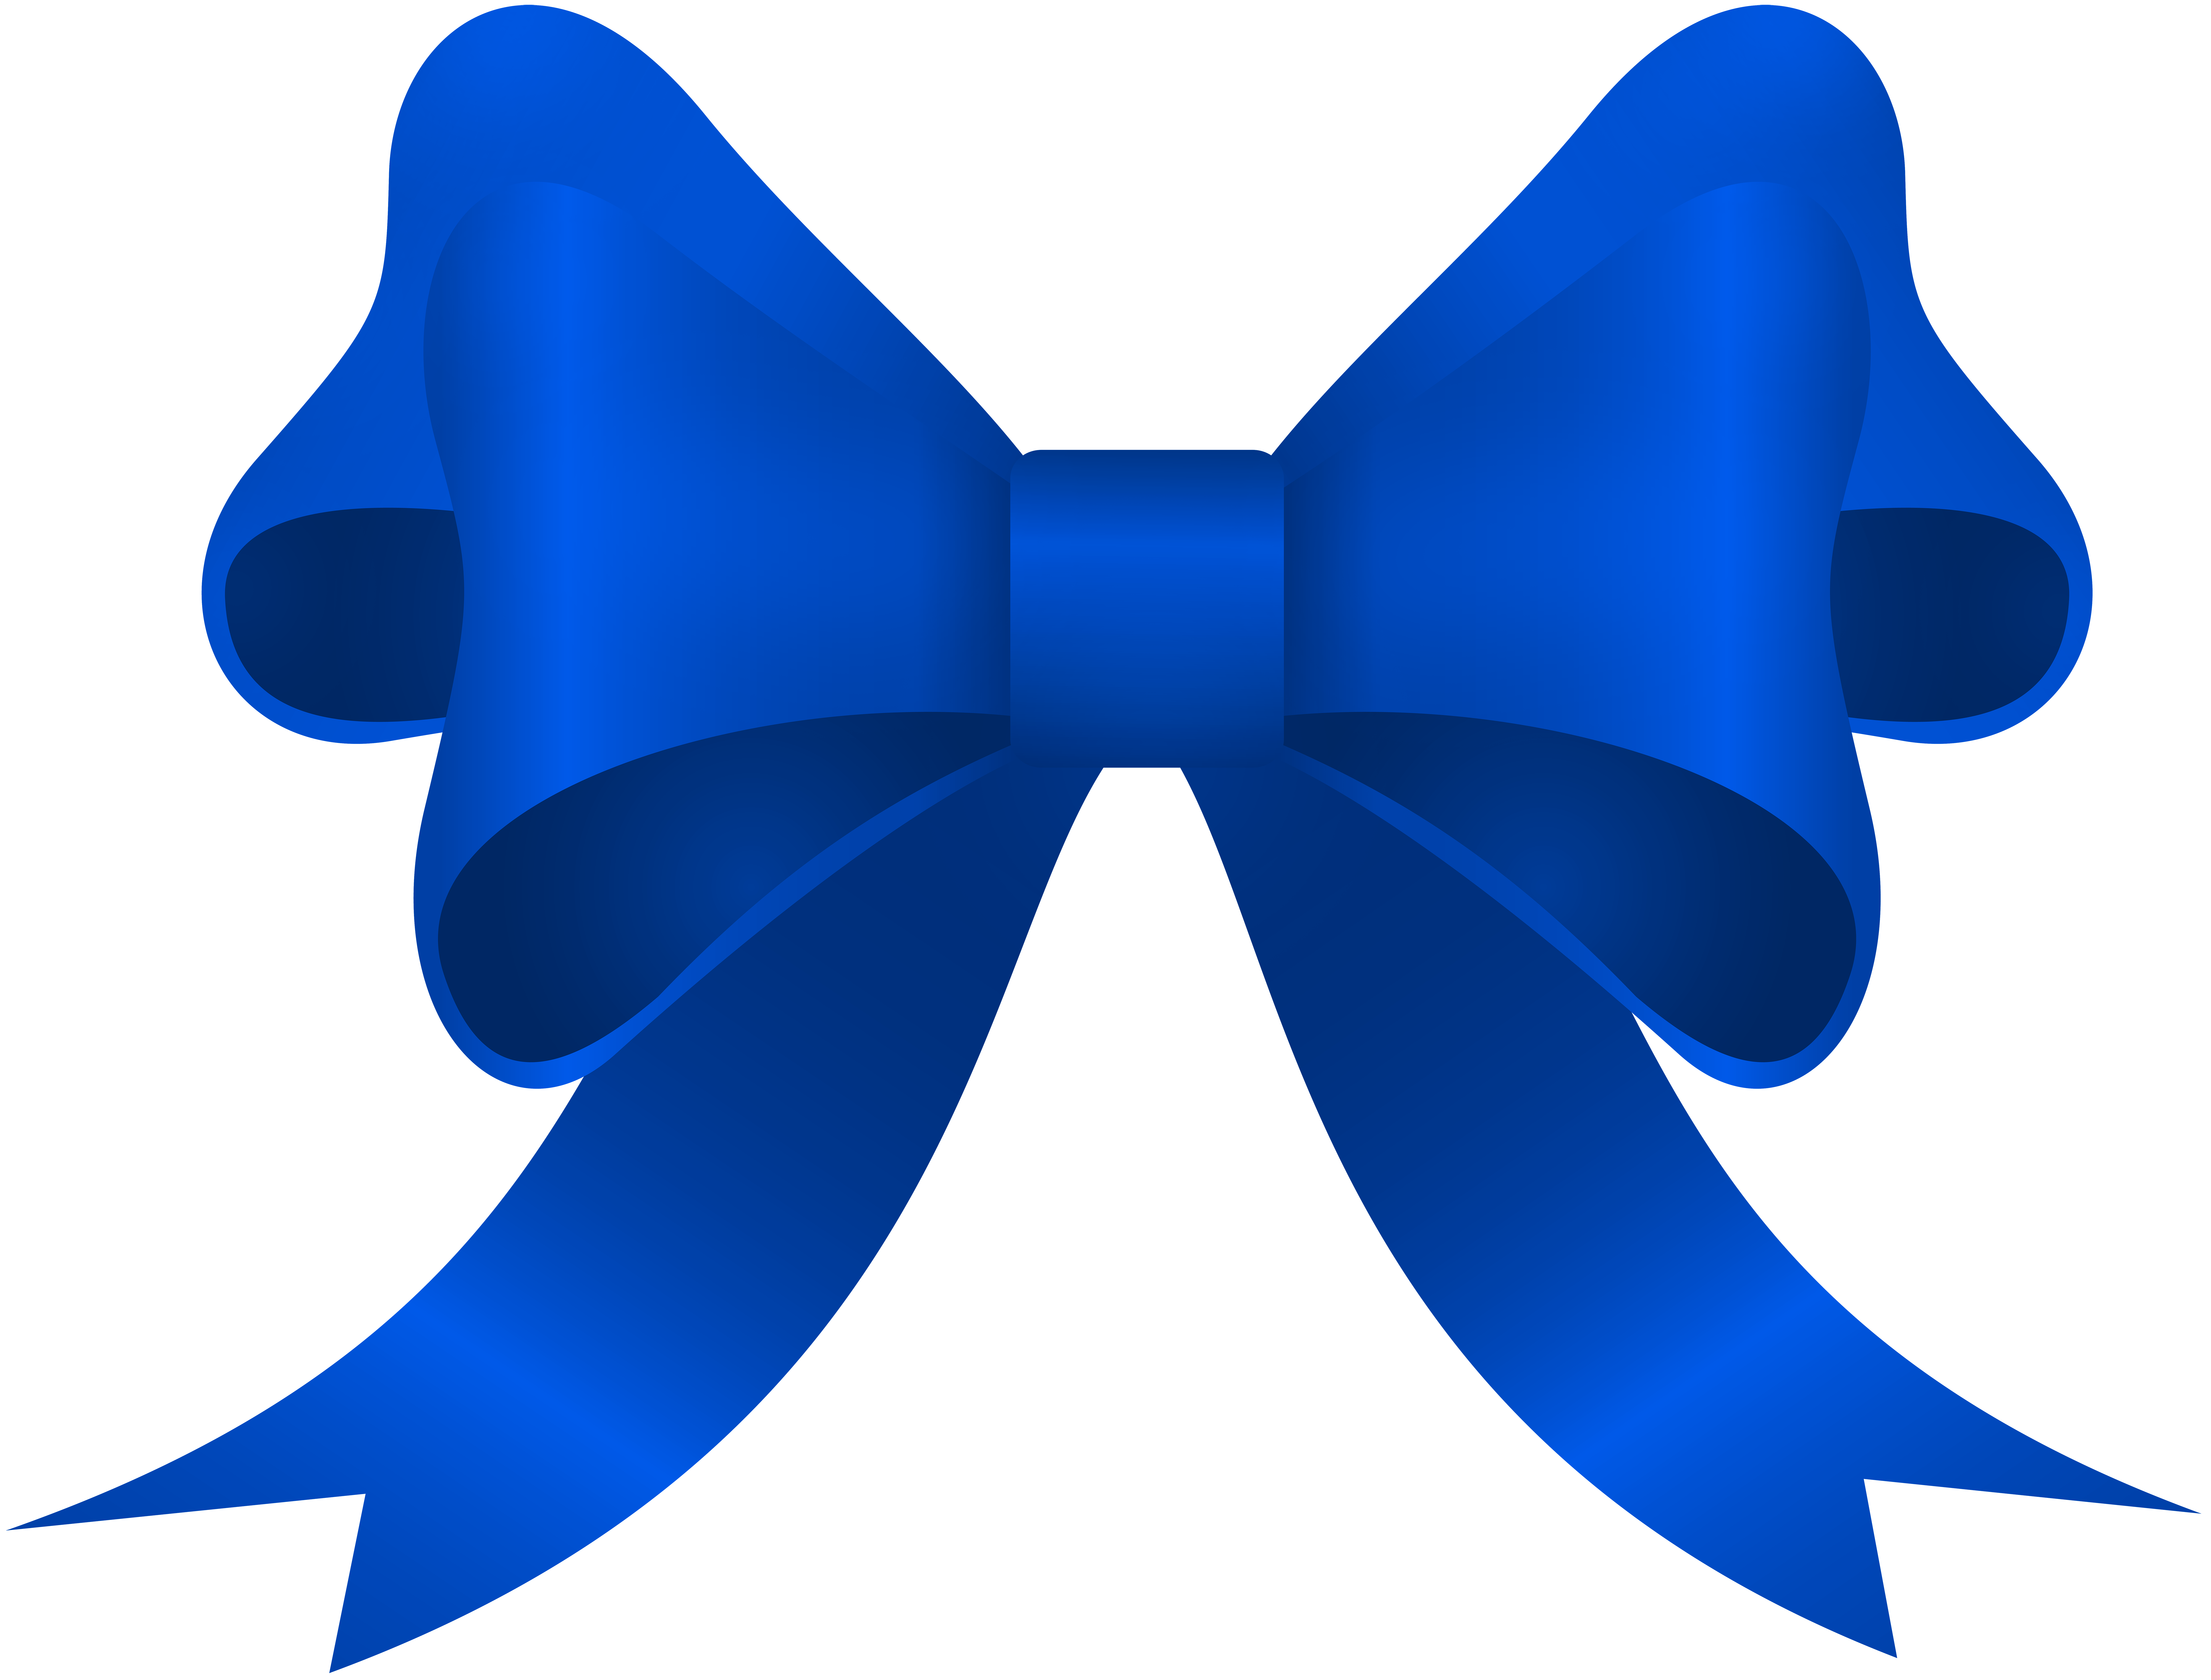 Ribbon with Bow Blue Transparent PNG Clip Art Image​  Gallery Yopriceville  - High-Quality Free Images and Transparent PNG Clipart